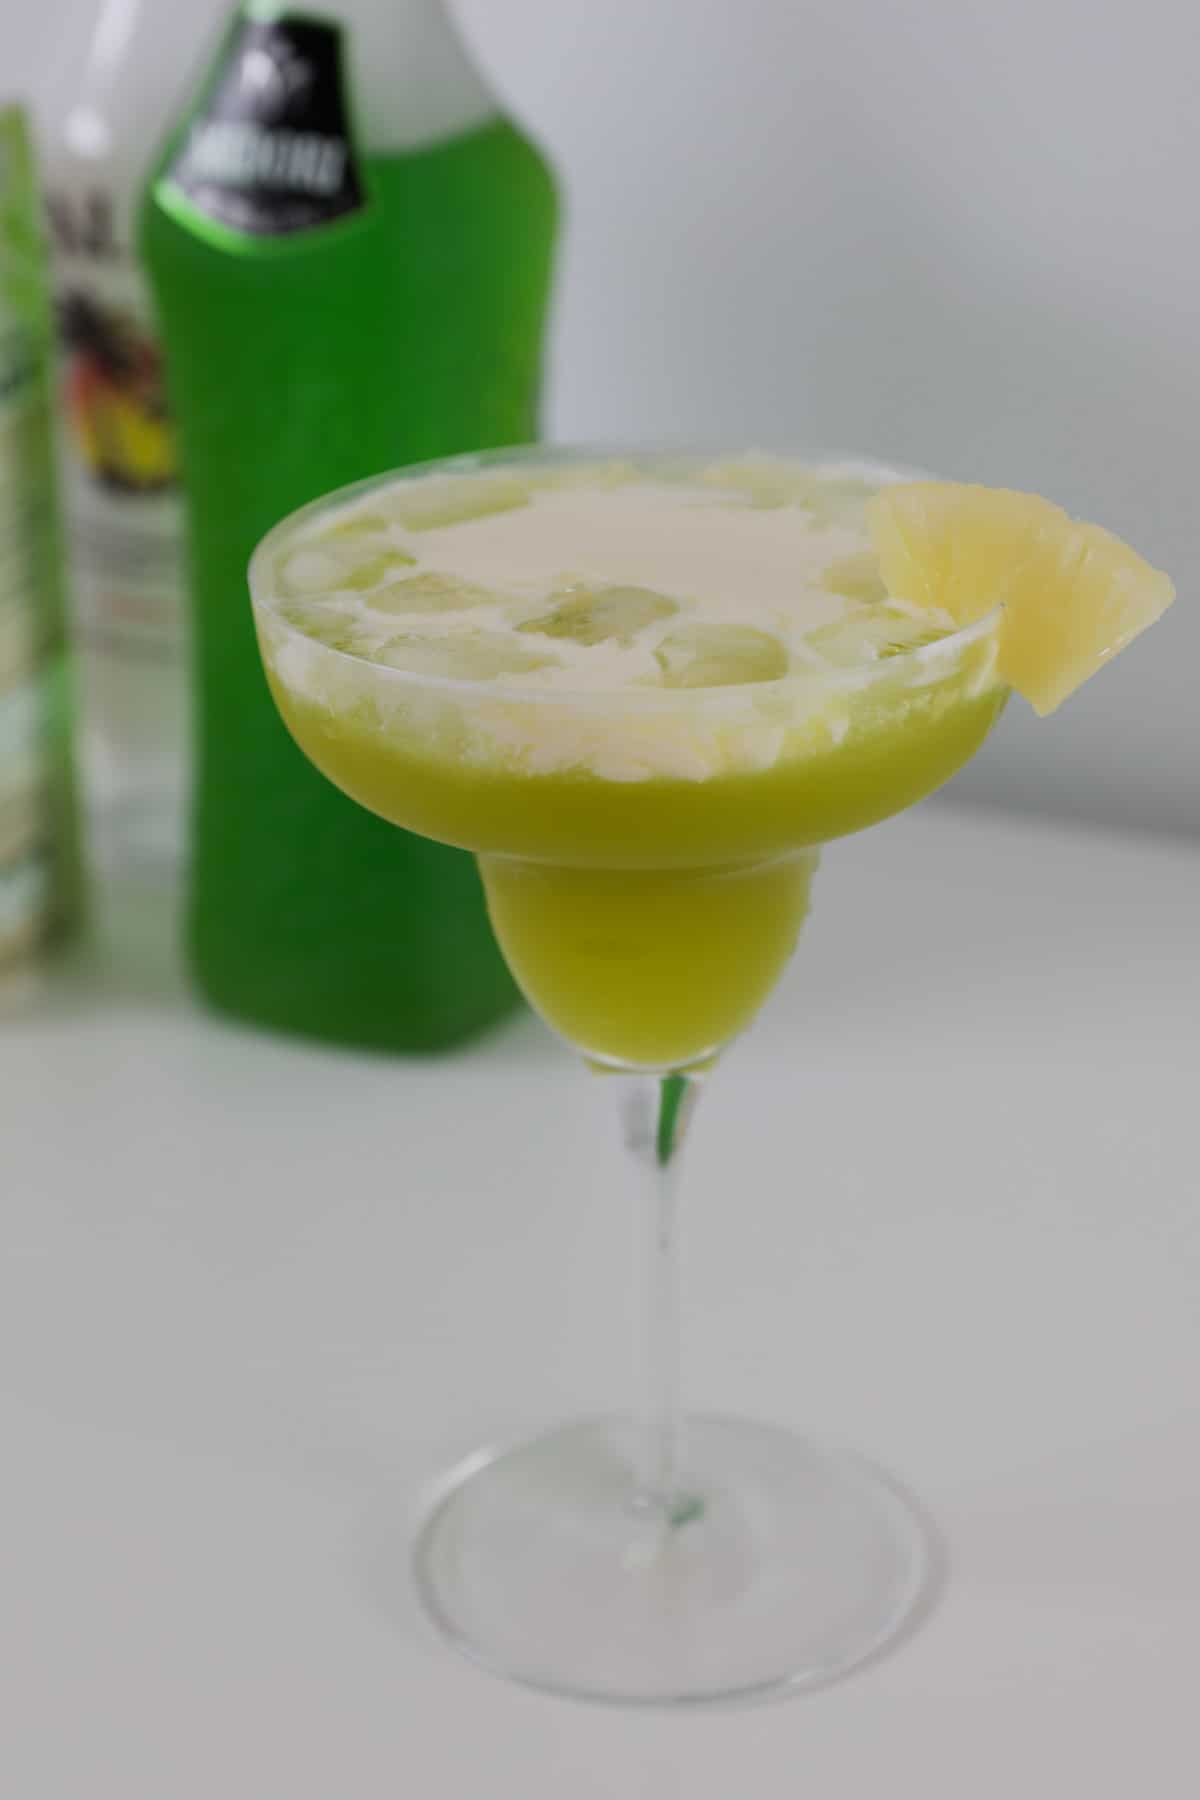 A green cocktail topped with cream in front of a bottle of Midori.